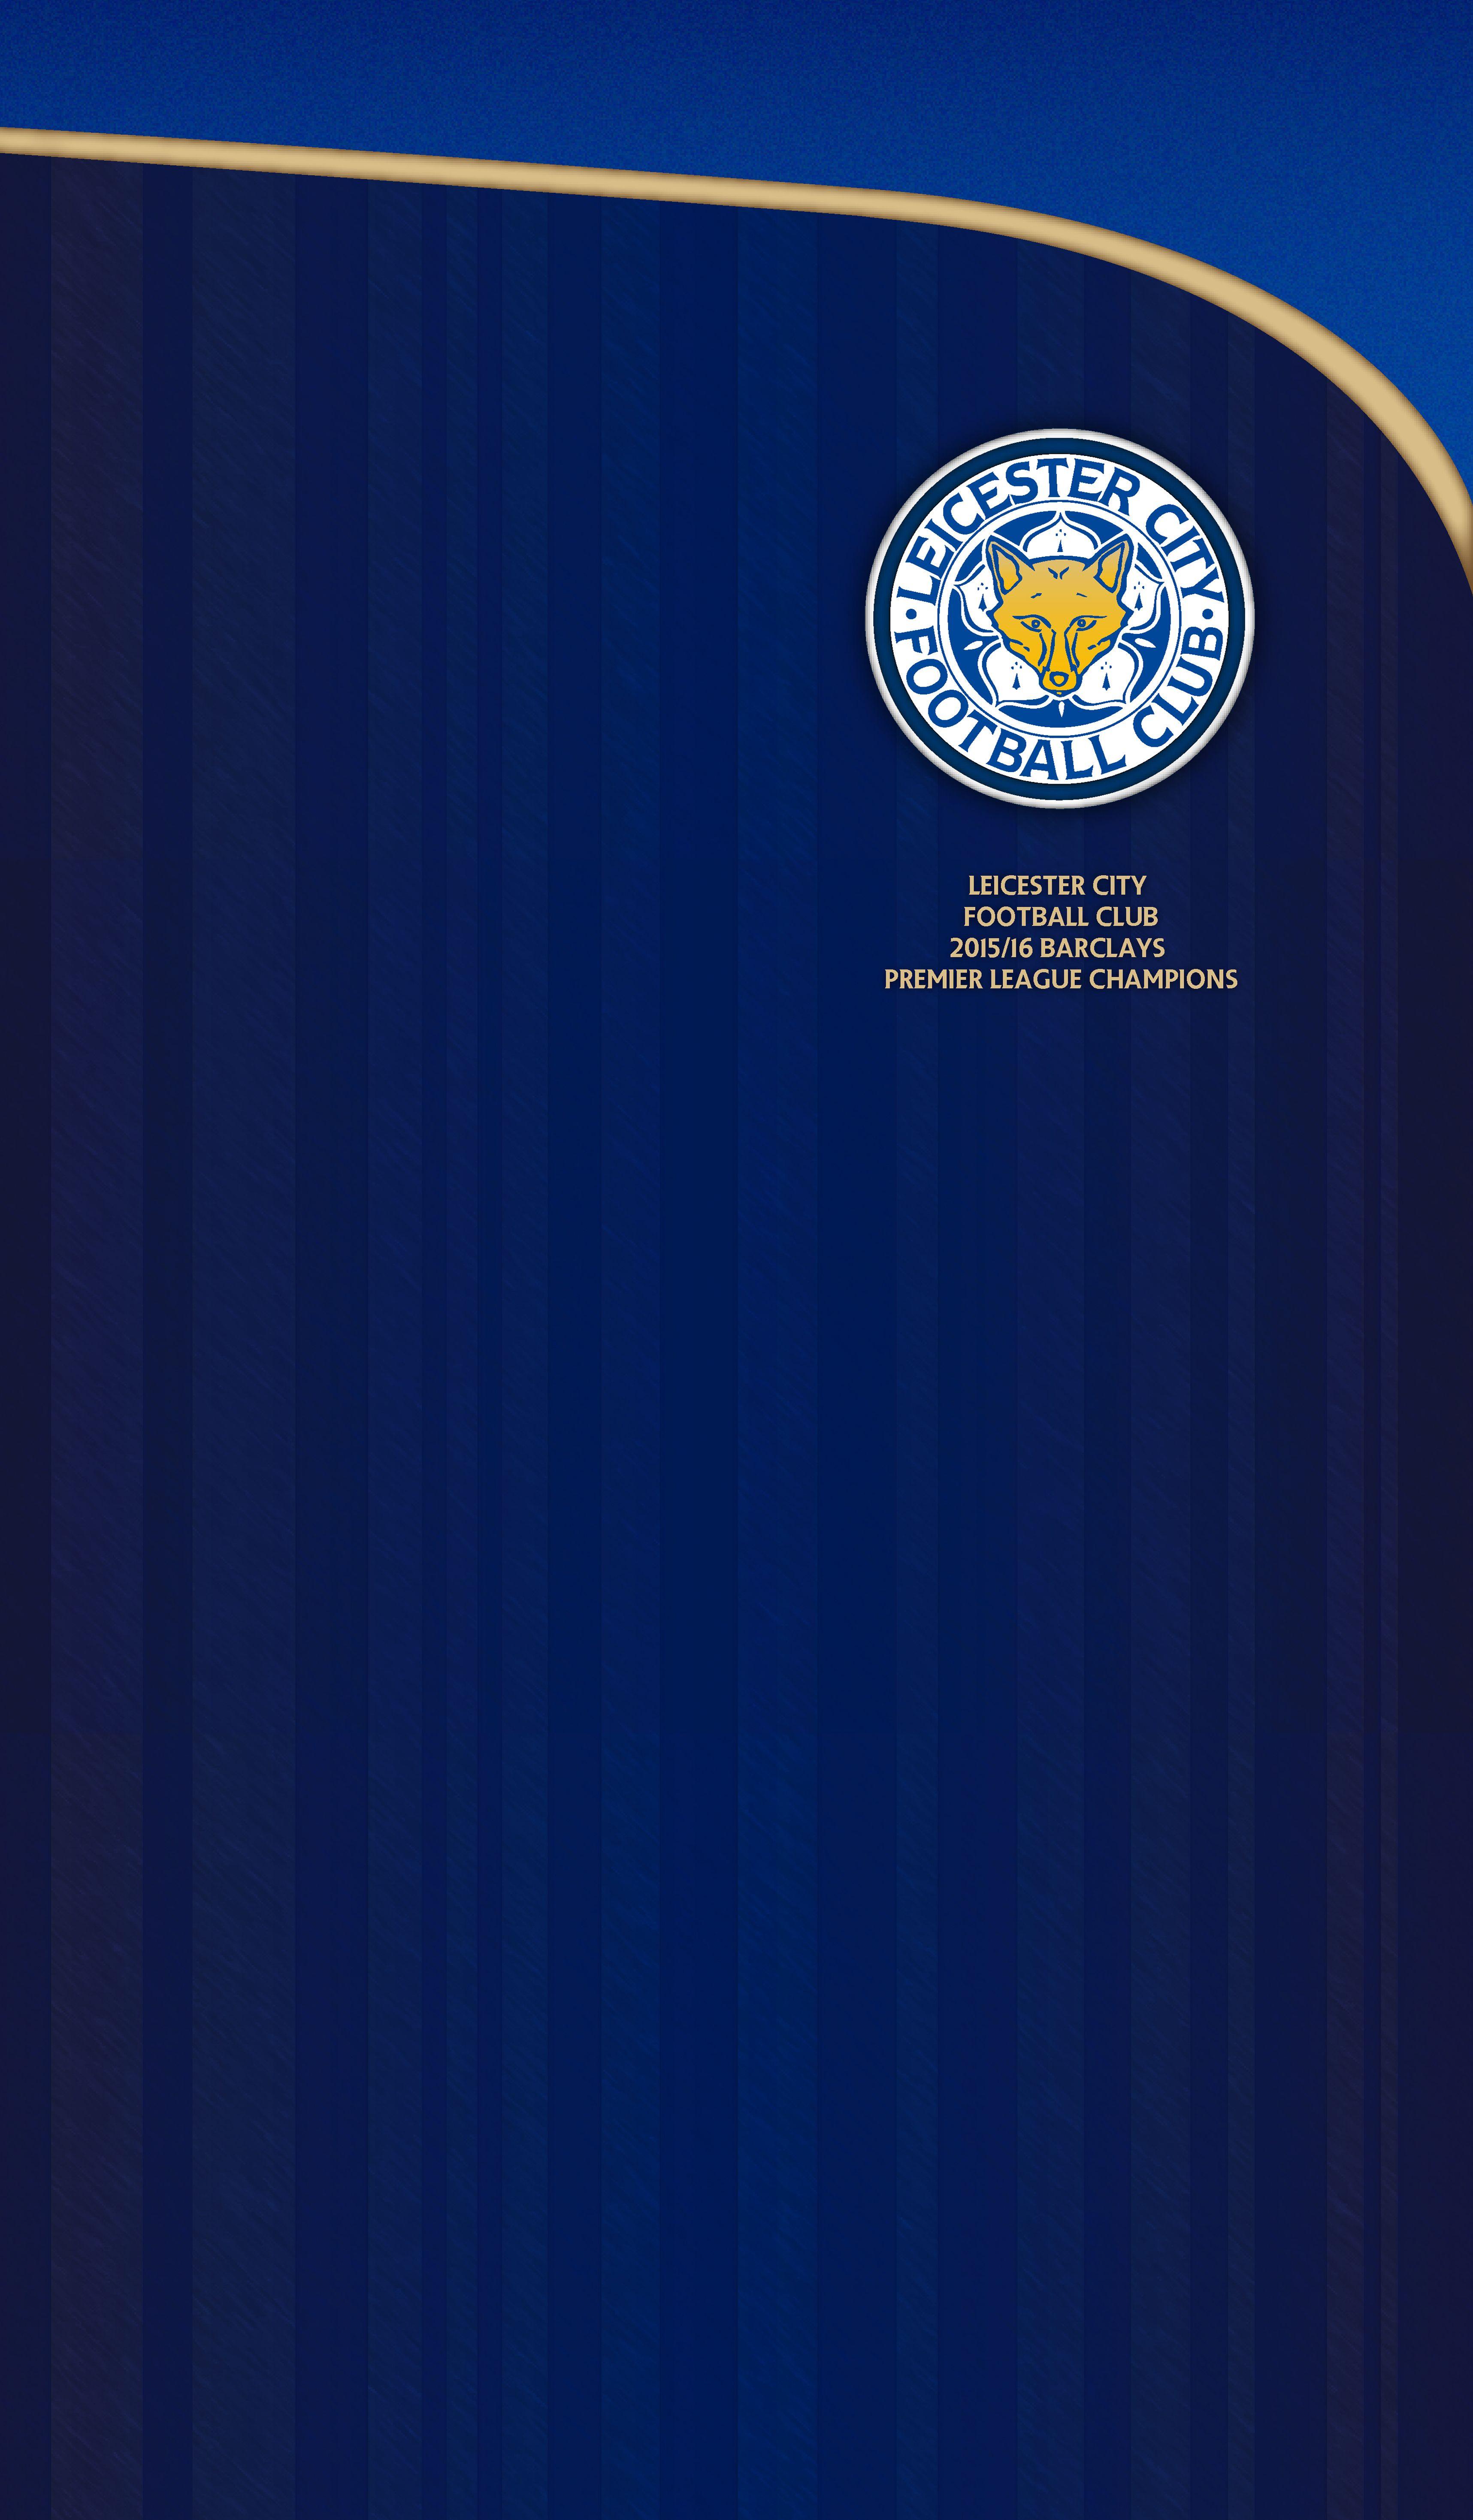 Leicester City Wallpapers - Wallpaper Cave